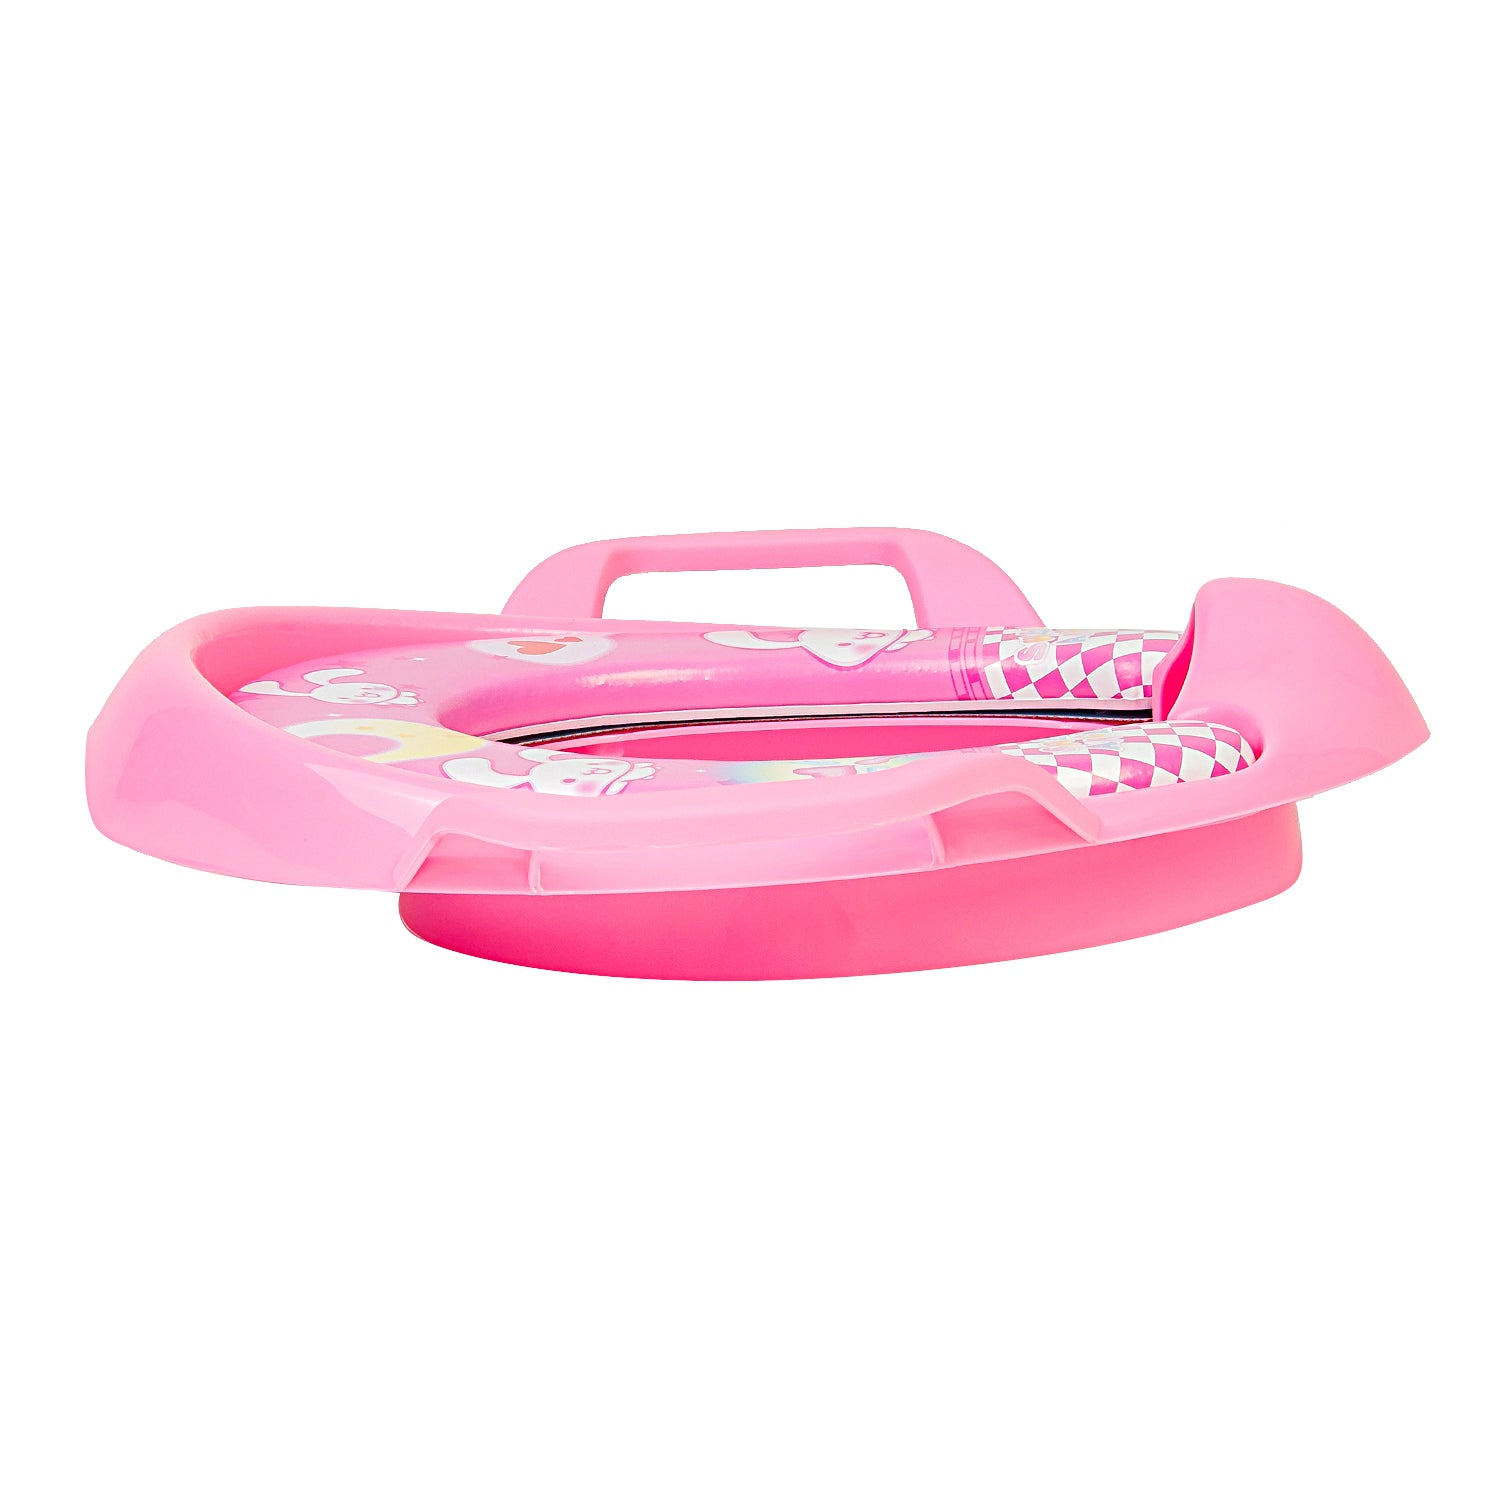 Rabbit Love Pink Potty Seat With Handle - Baby Moo